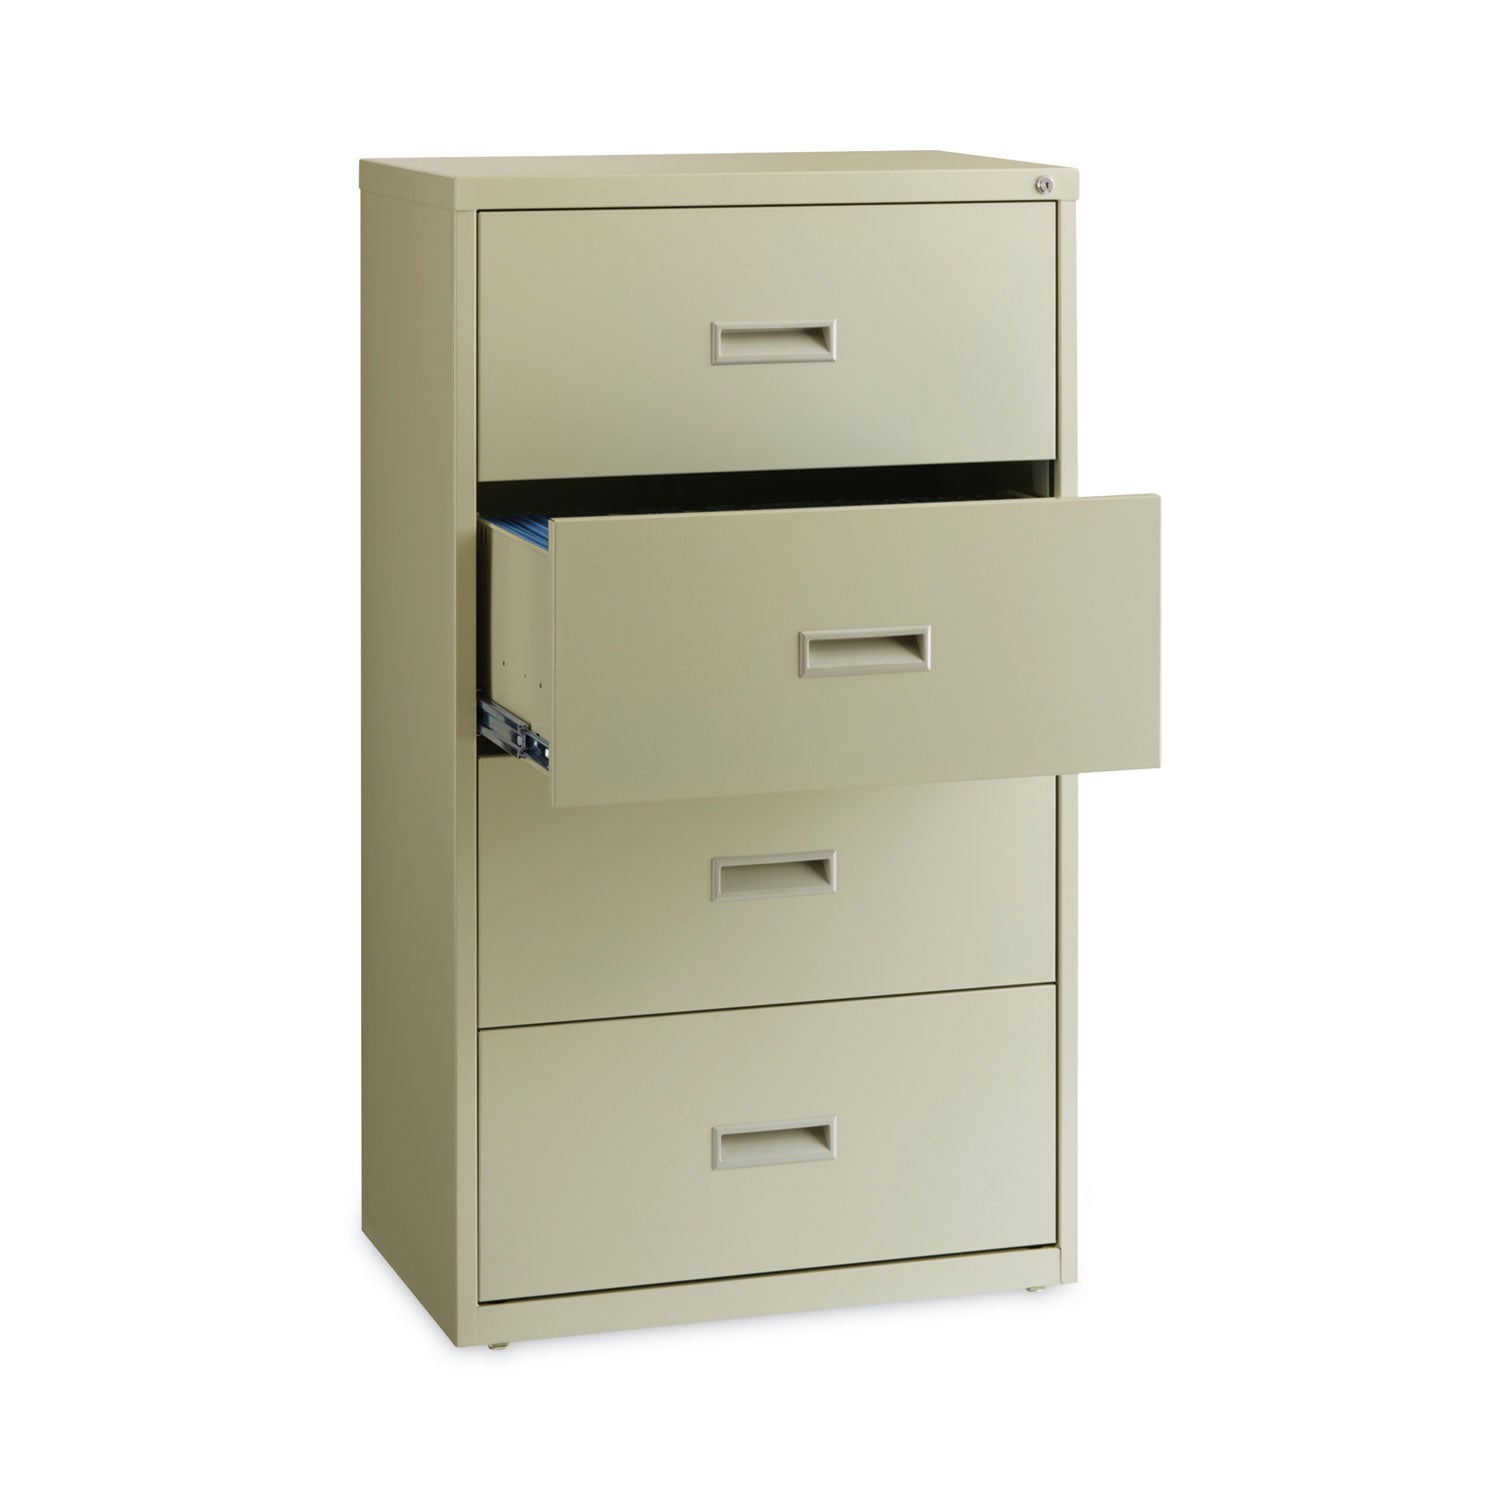 lateral-file-cabinet-4-letter-legal-a4-size-file-drawers-putty-30-x-1862-x-525_hid14956 - 3